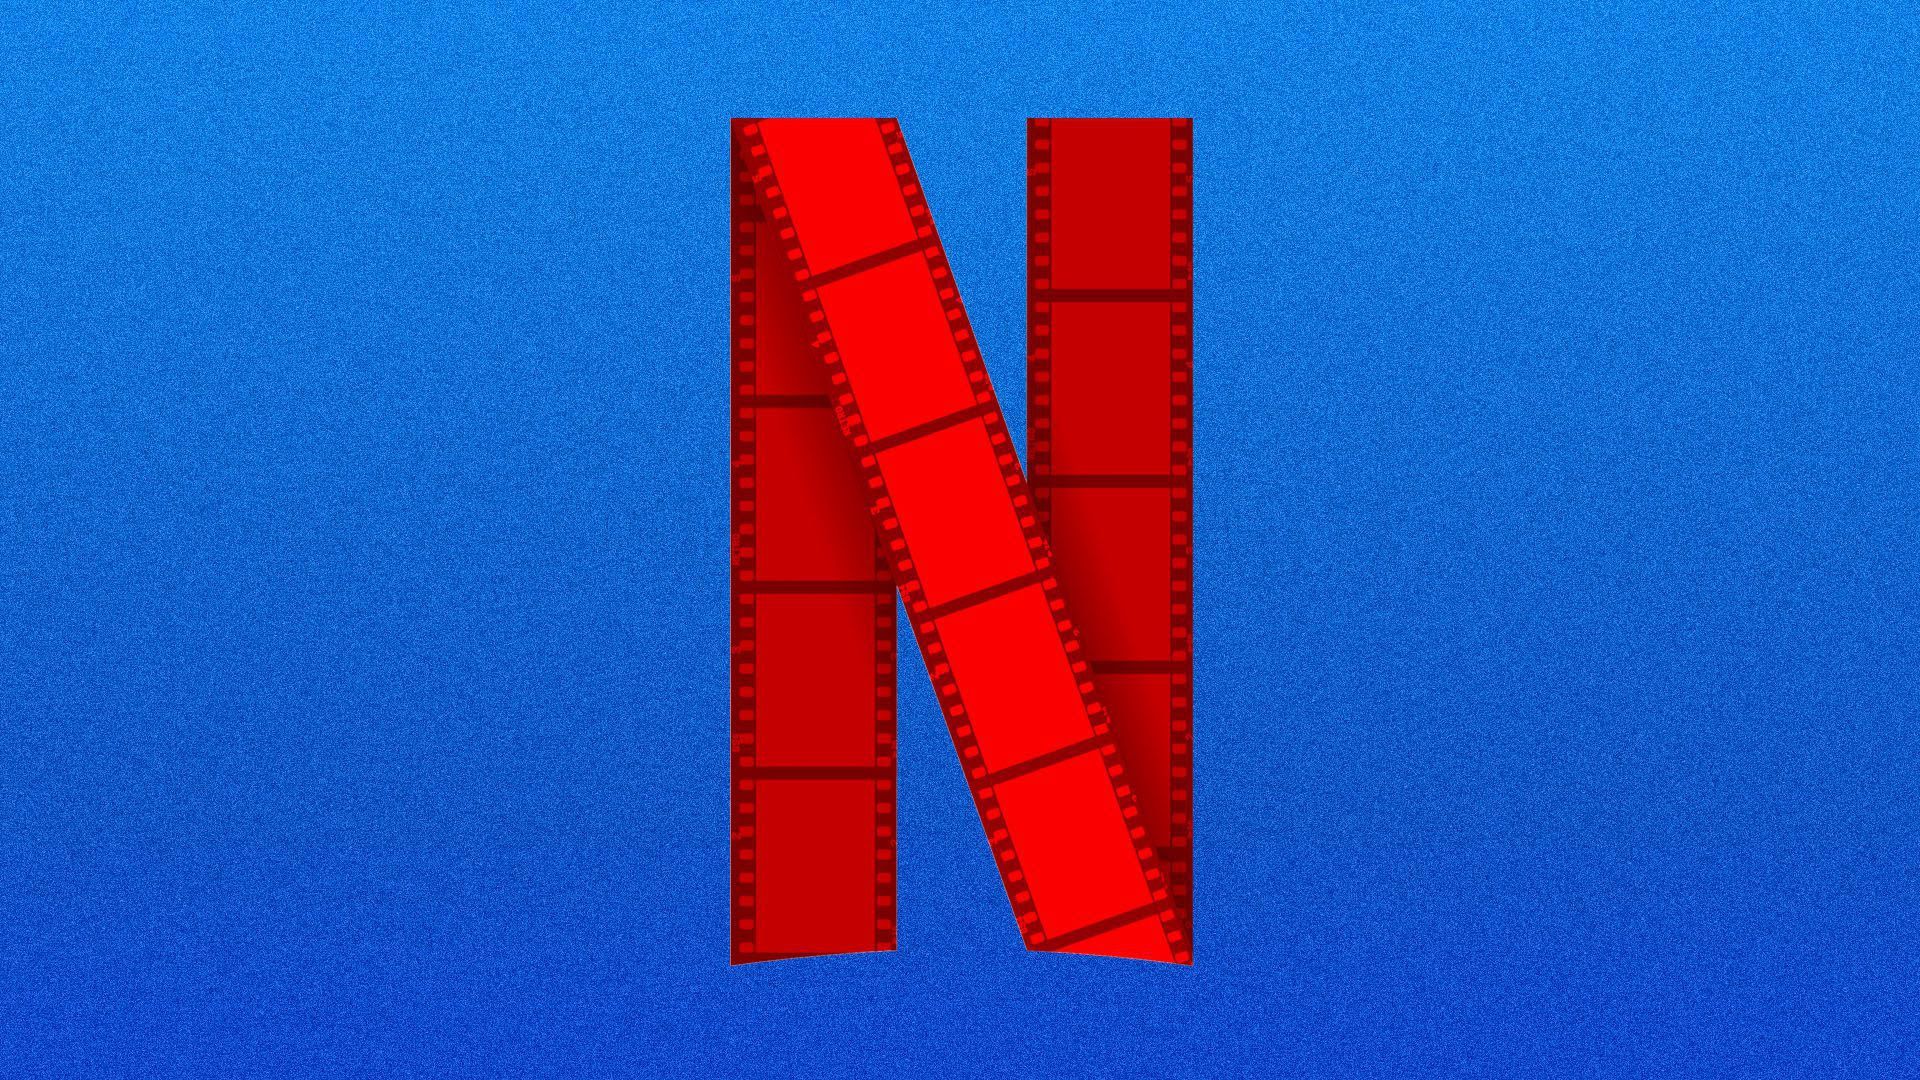 Illustration of the Netflix logo made out of movie reels